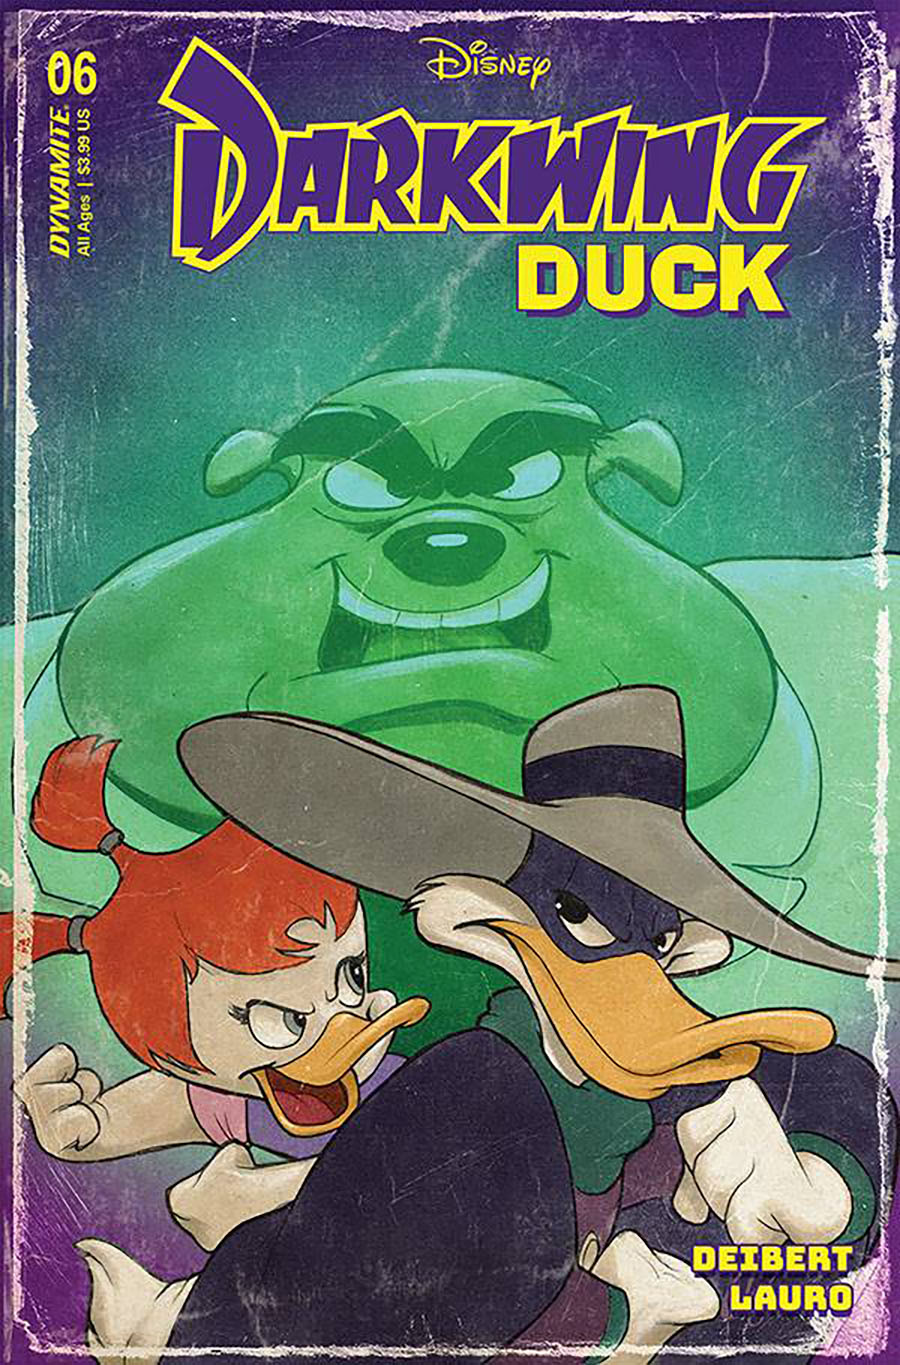 Darkwing Duck Vol 3 #6 Cover Q Variant Cat Staggs Cover